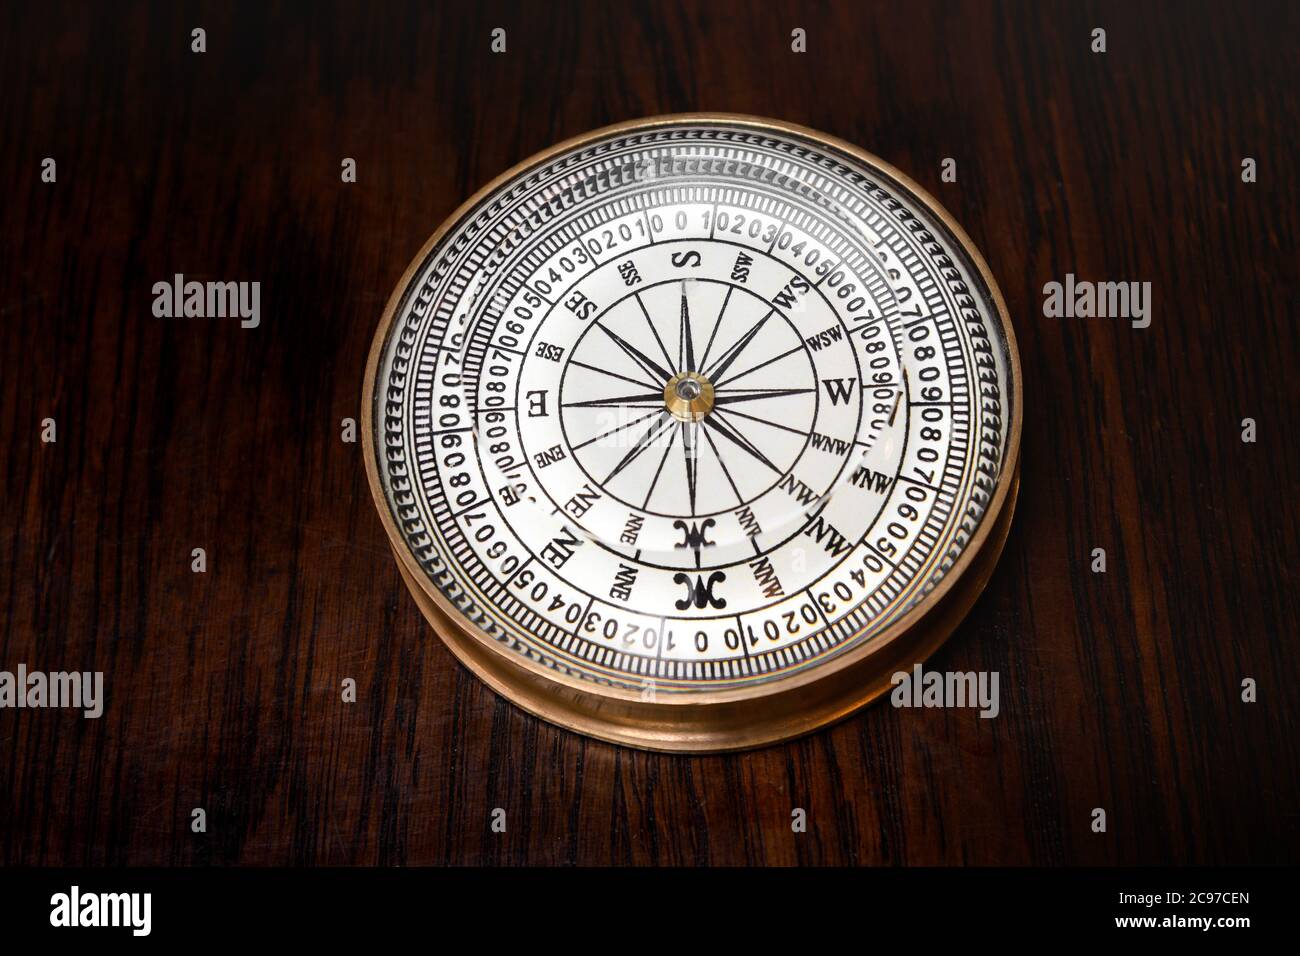 Old round brass magnetic vintage compass with glass dial lying on a wooden board in a high angle view Stock Photo